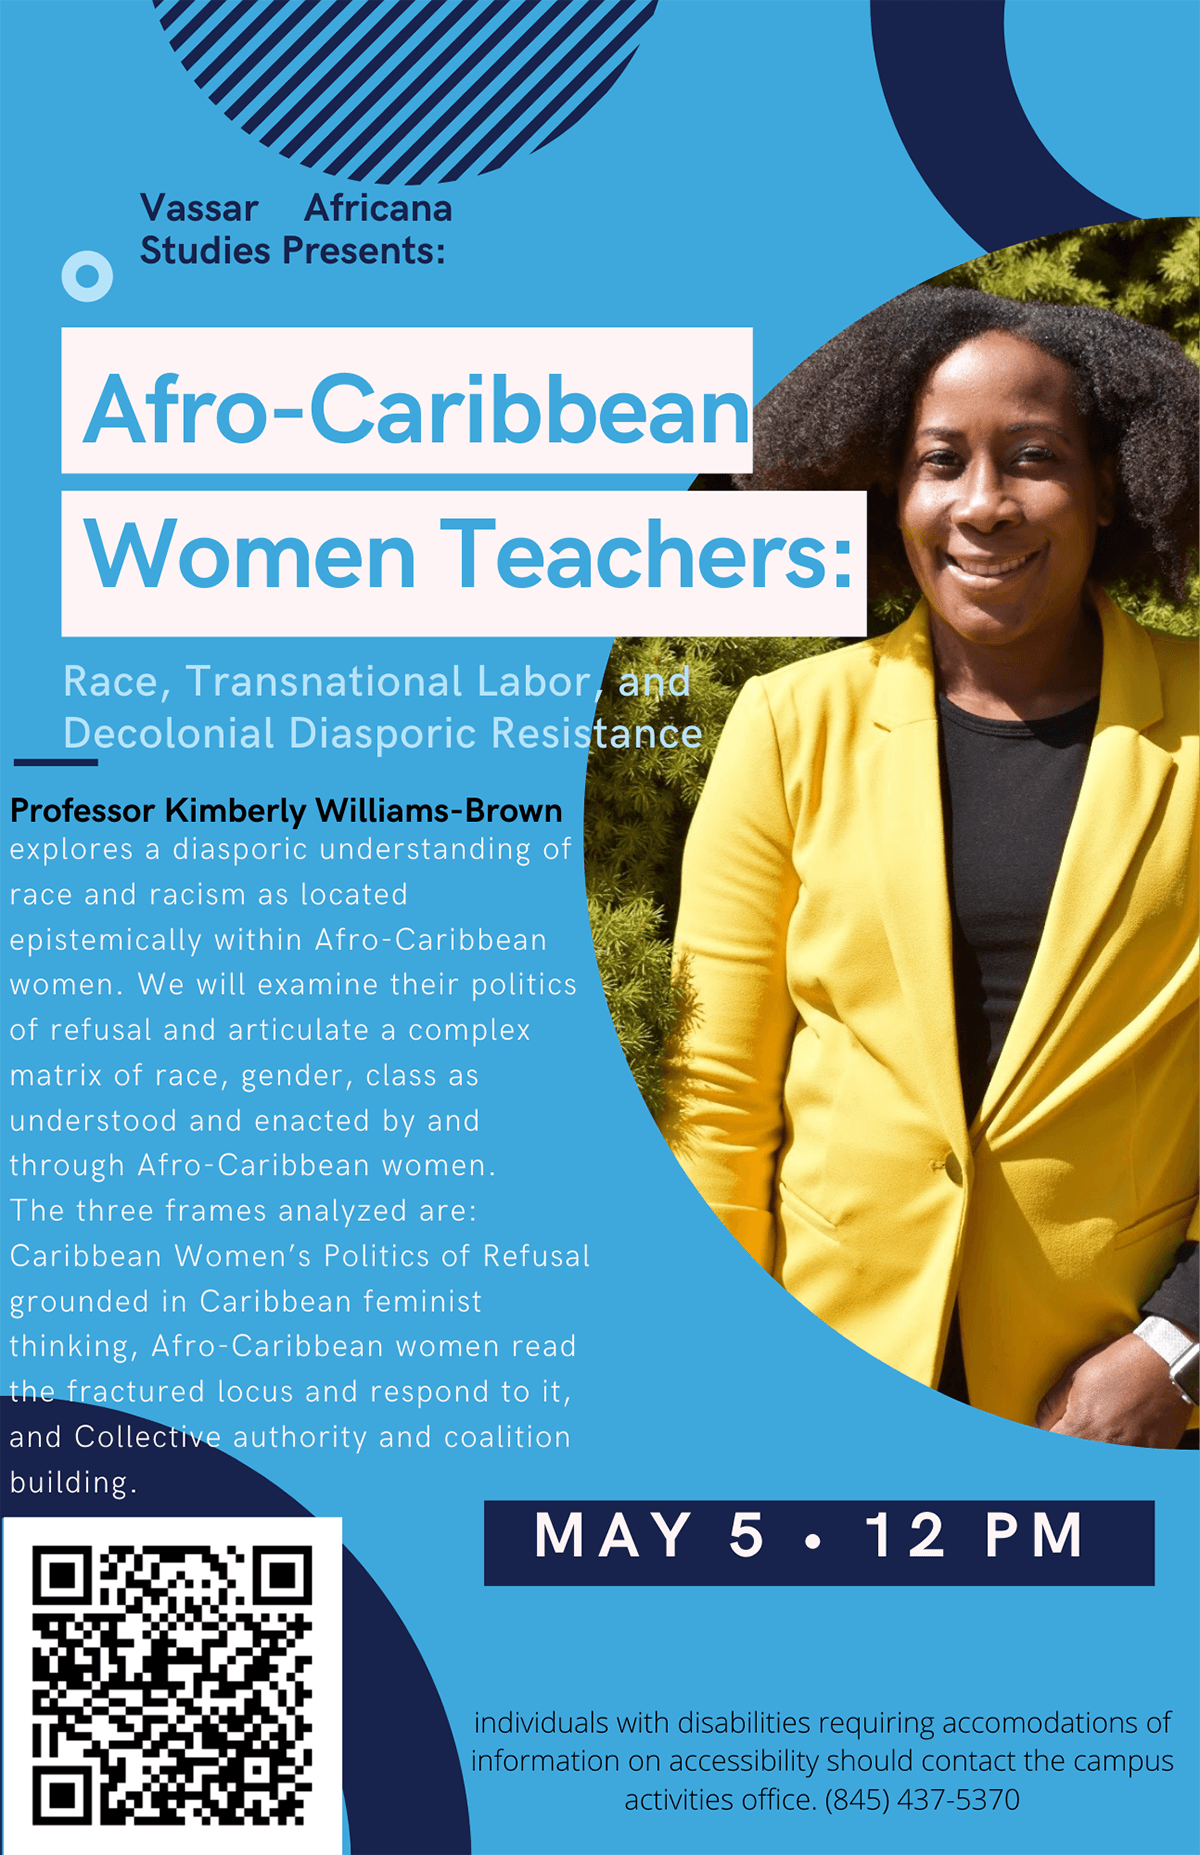 Afro-Carribbean Women Teachers: Race, Transnational Labor, and Decolonial Diasporic Resistance. May 5, 12pm.